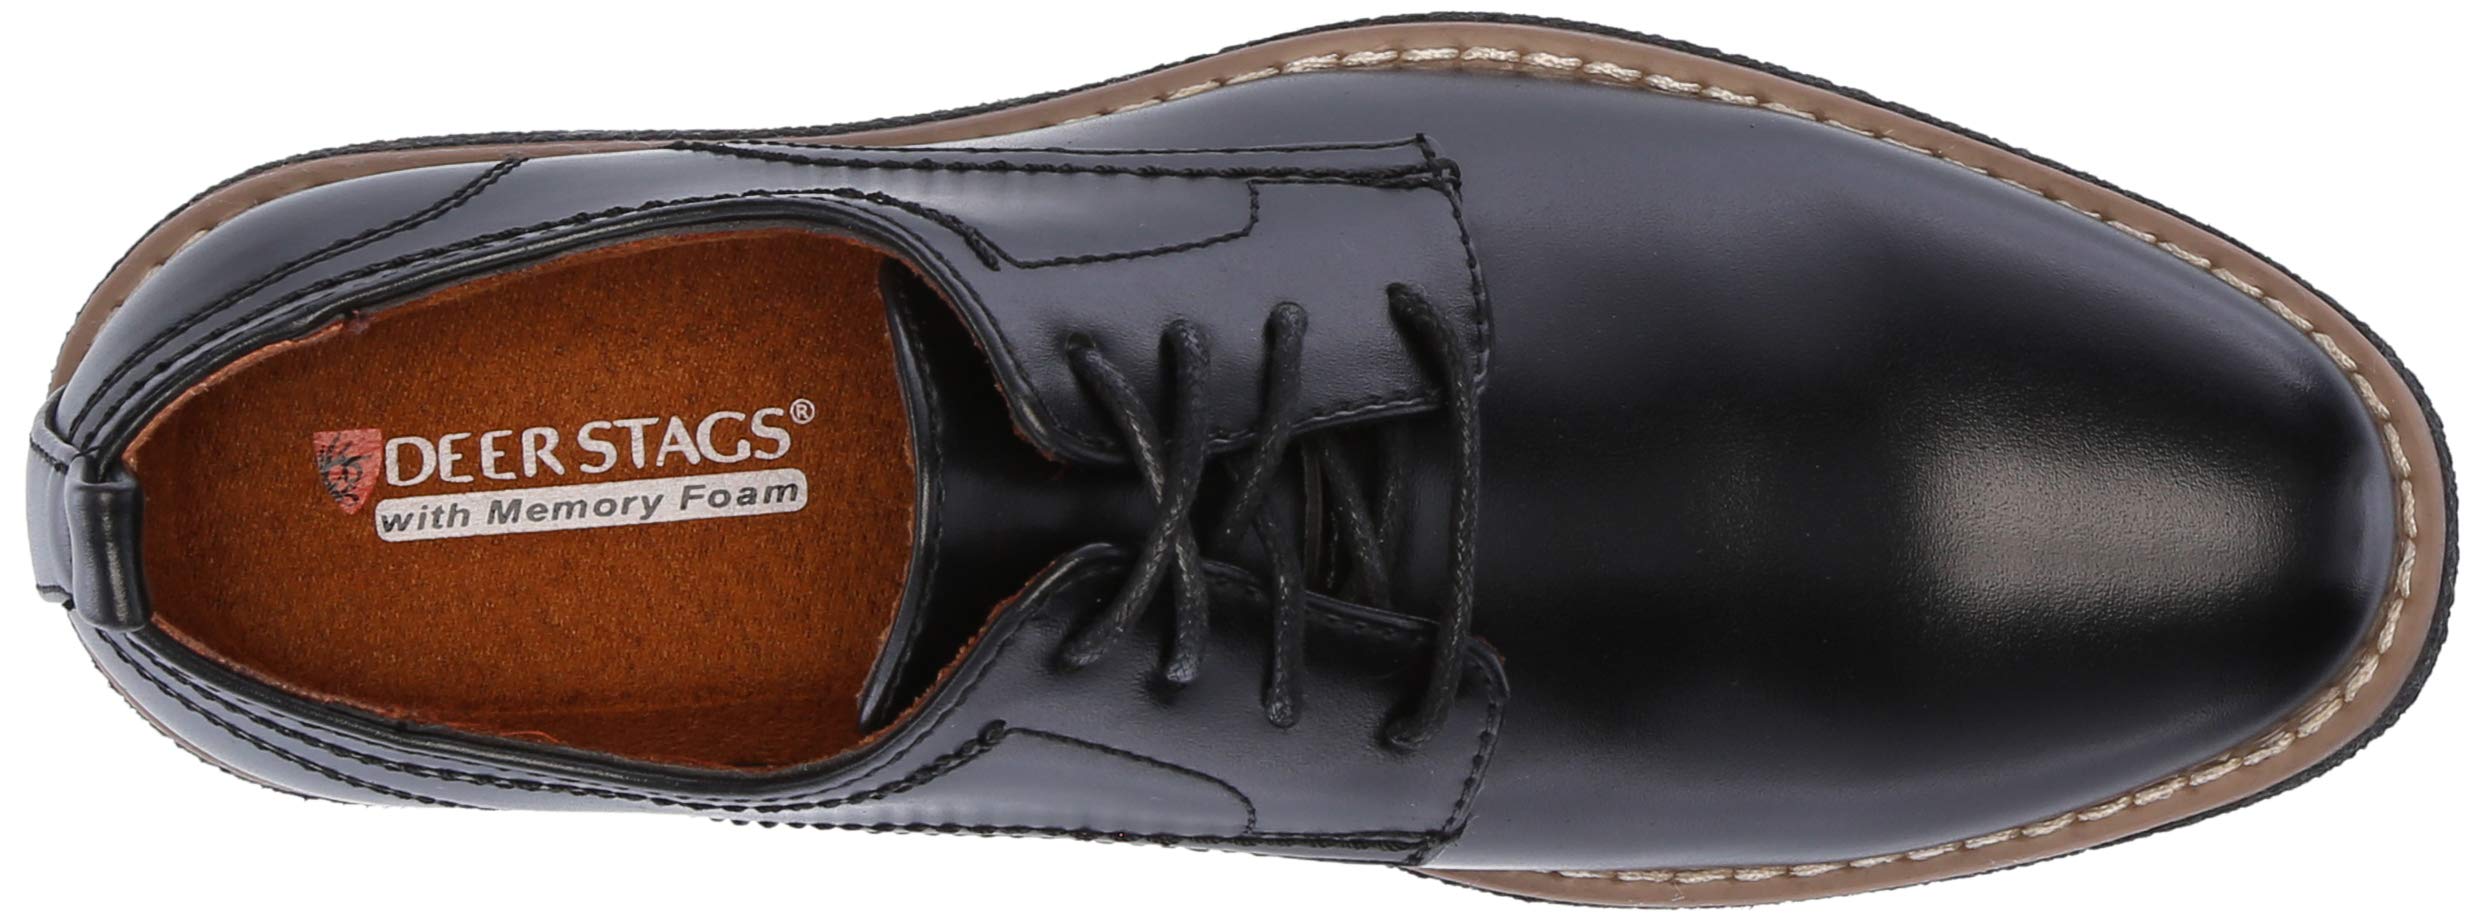 Deer Stags Boys Zander Lace-Up Dress Comfort Oxford